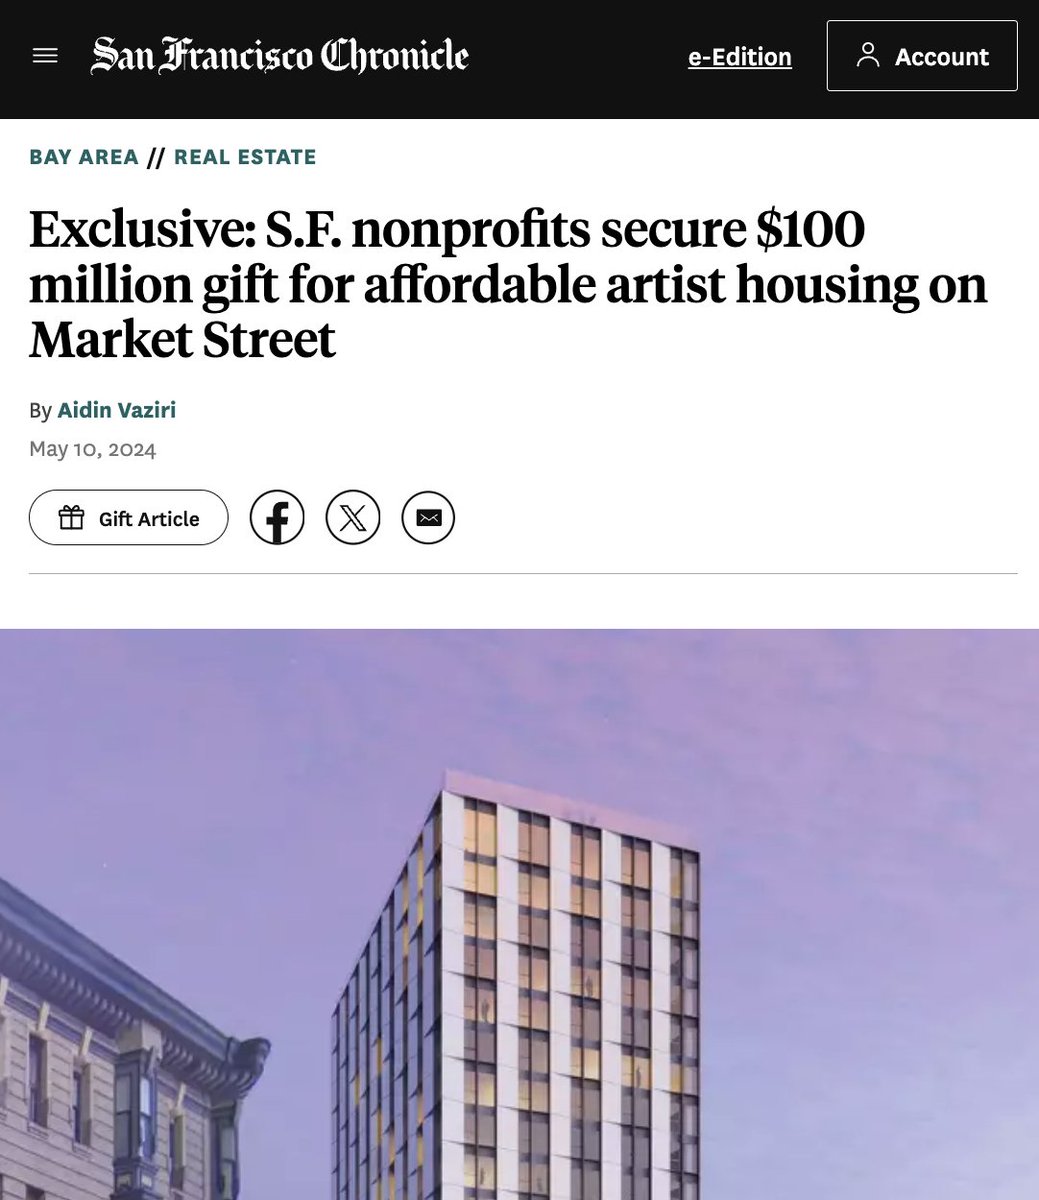 This is the power of pro housing legislation. Due to passage of @BuffyWicks AB2011, we may now get 100% affordable housing for 100 artists streamlined in SF. A possible decision in 90 days, with construction beginning next year, and completion 18 months after. More of this.